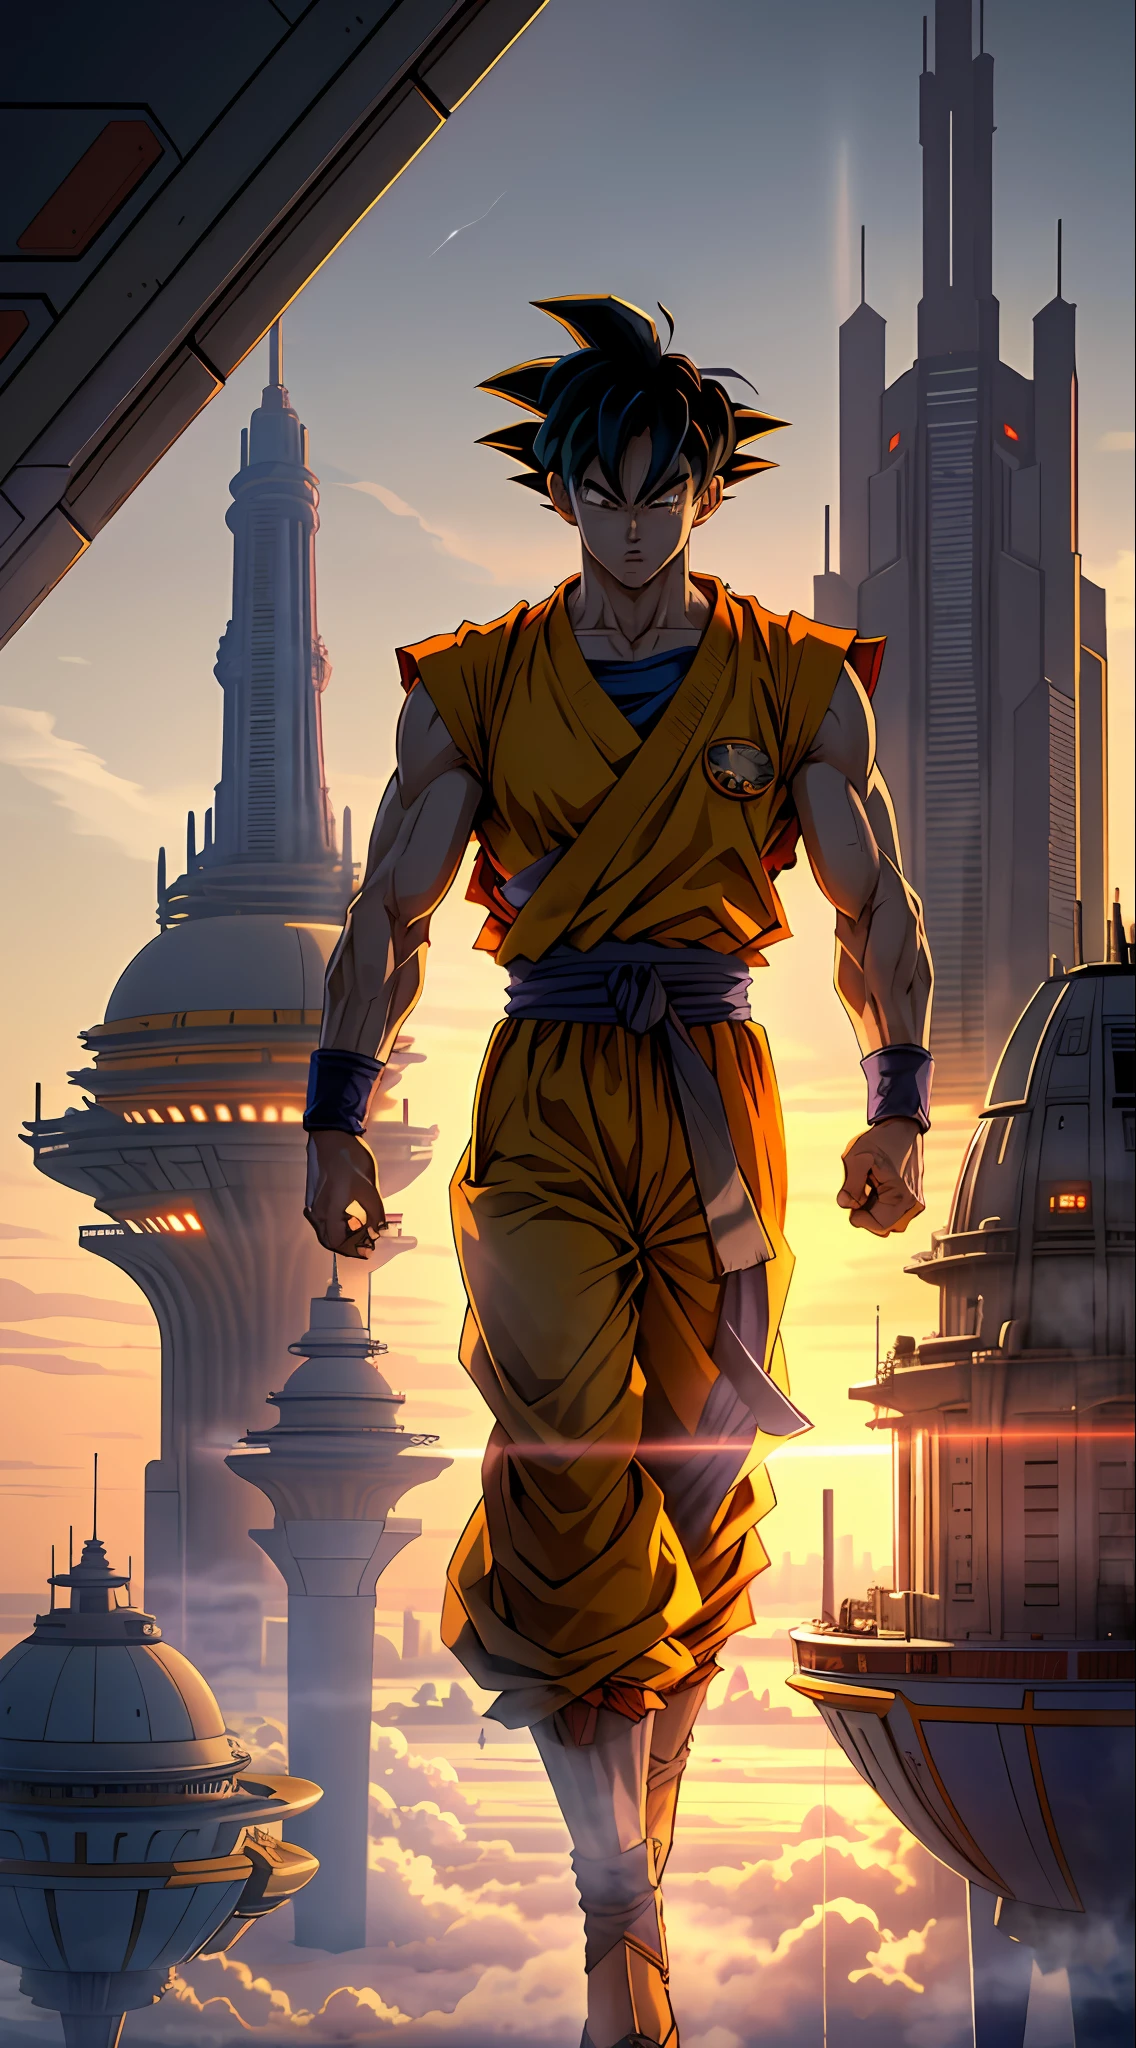 Goku em Bespin, a powerful warrior from another planet, trains in the floating city of Bespin high above the clouds. The futuristic cityscape is awe-inspiring, with towering skyscrapers and bustling air traffic. Goku trains with intense focus, surrounded by a calm and serene atmosphere that belies the city's frenetic energy. The atmosphere is filled with a sense of anticipation, as if Goku is preparing for an impending battle. The lighting is dim, with a diffuse, yellow hue that casts long shadows on the ground, adding to the pensive mood #endl